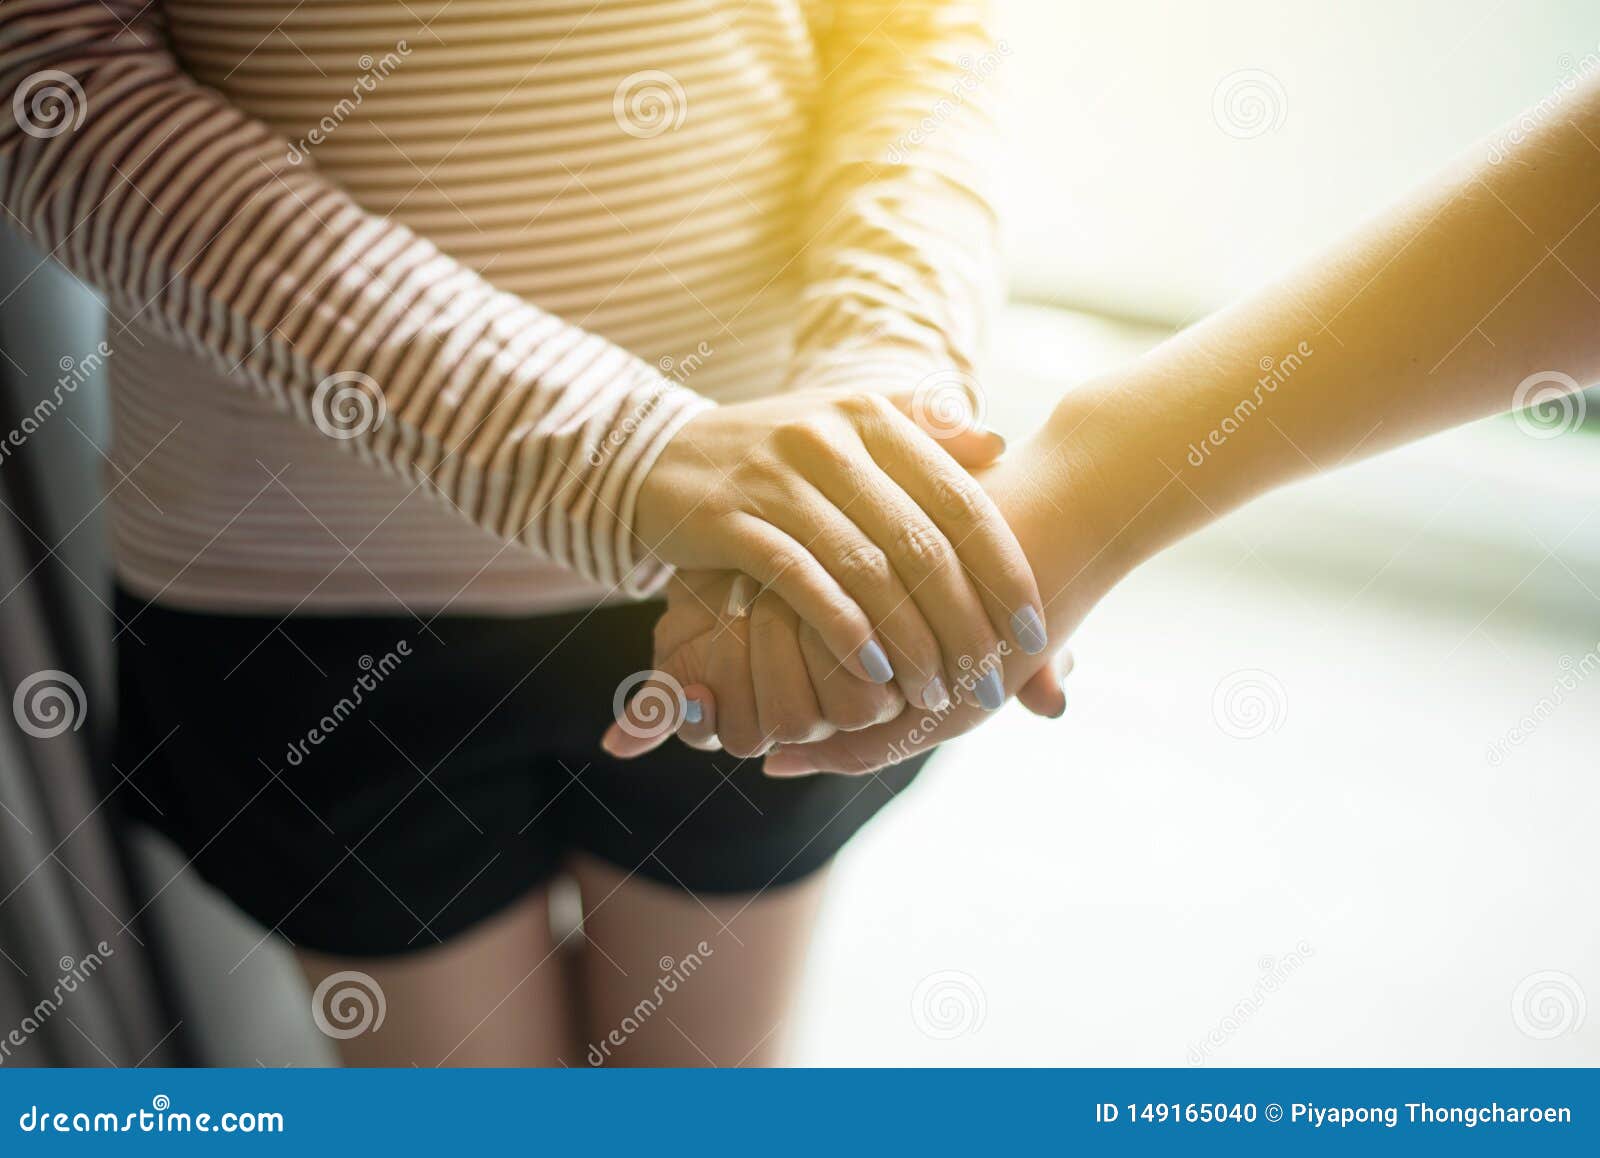 picture of couple women friends holding hands and caring supporting comforting together,encouragement concept